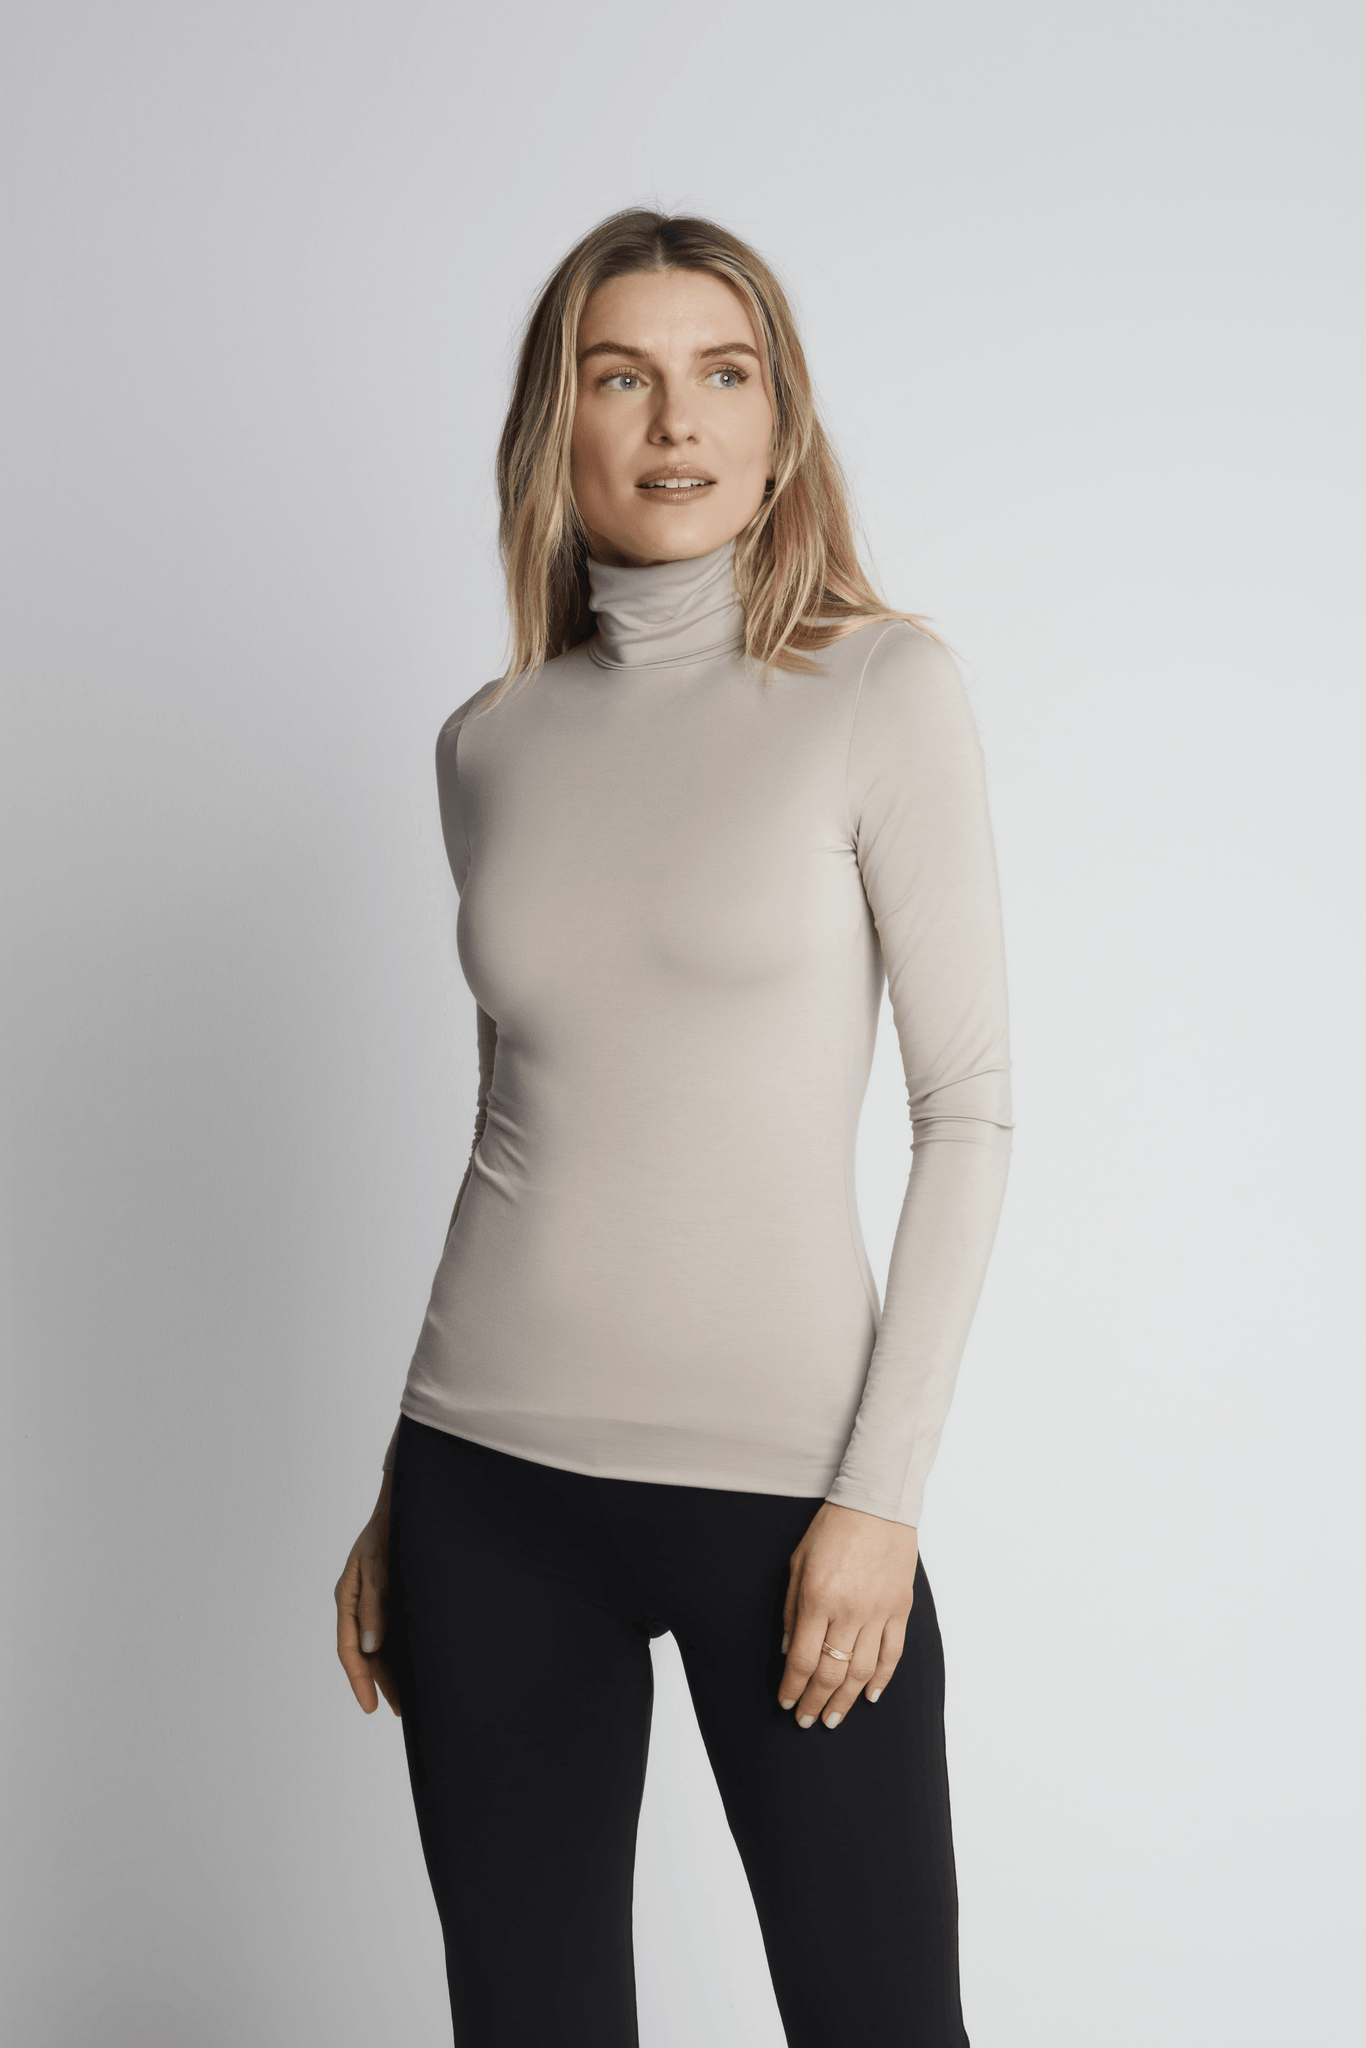 Roll Neck Micro Modal Top Women's Long Sleeve T-shirt Lavender Hill Clothing